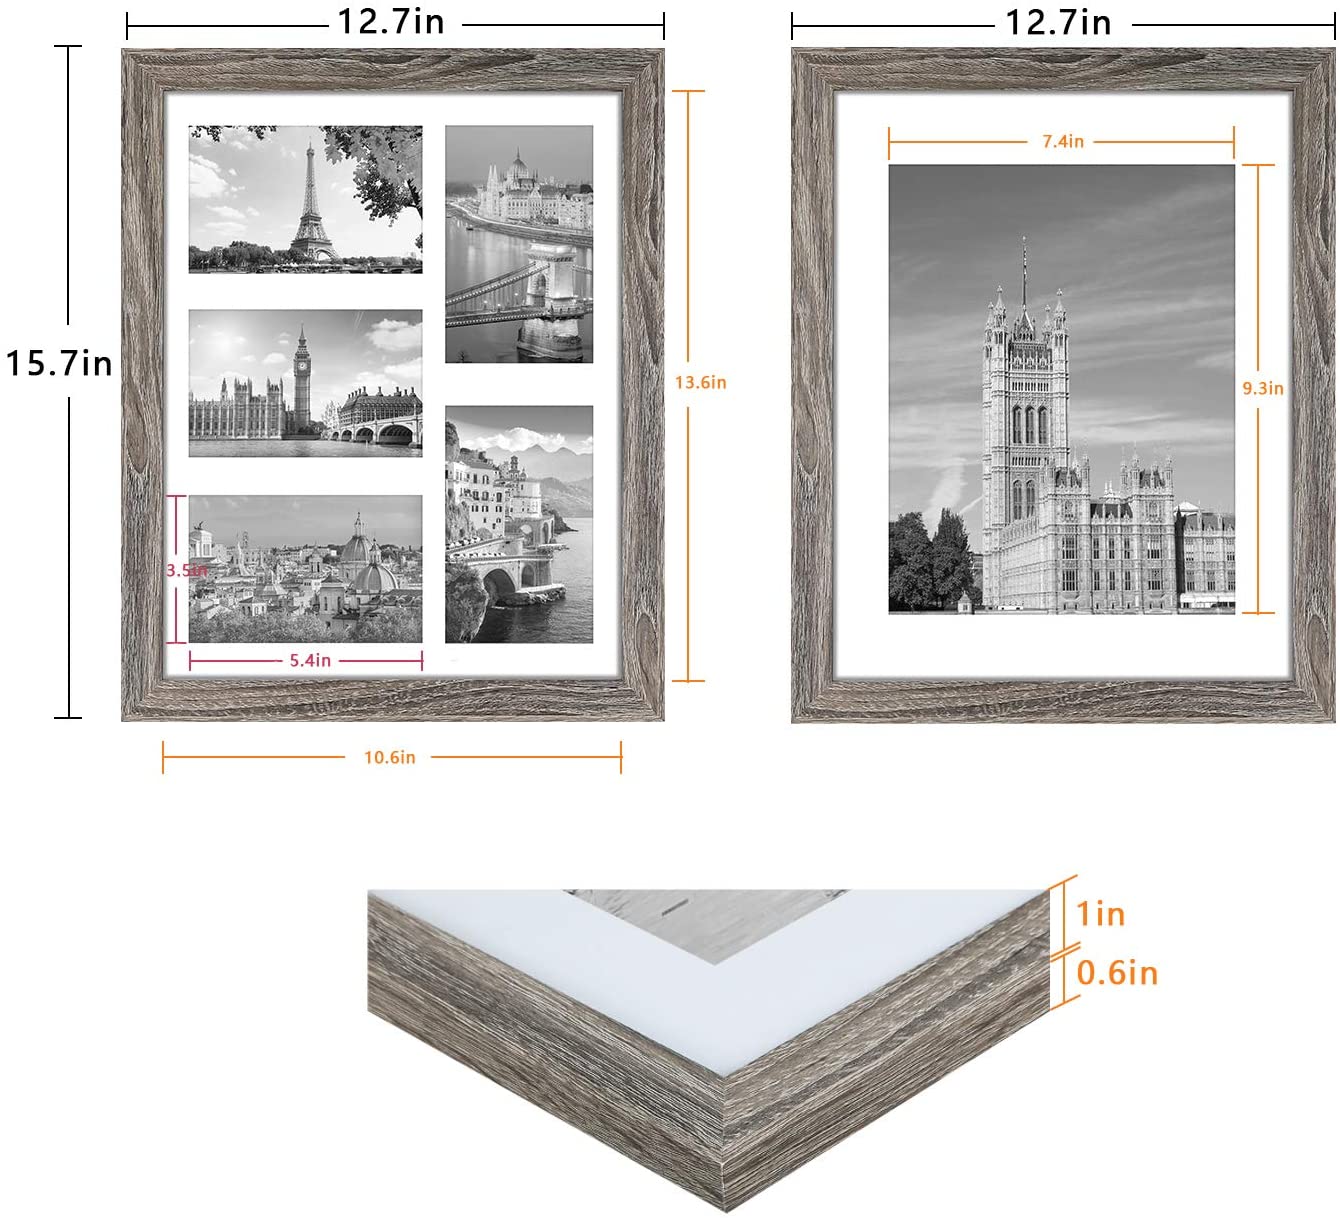 NUOLAN 11x14 Picture Frame Rustic Wood Pattern Set of 2 with 4 Mats. - e4cents